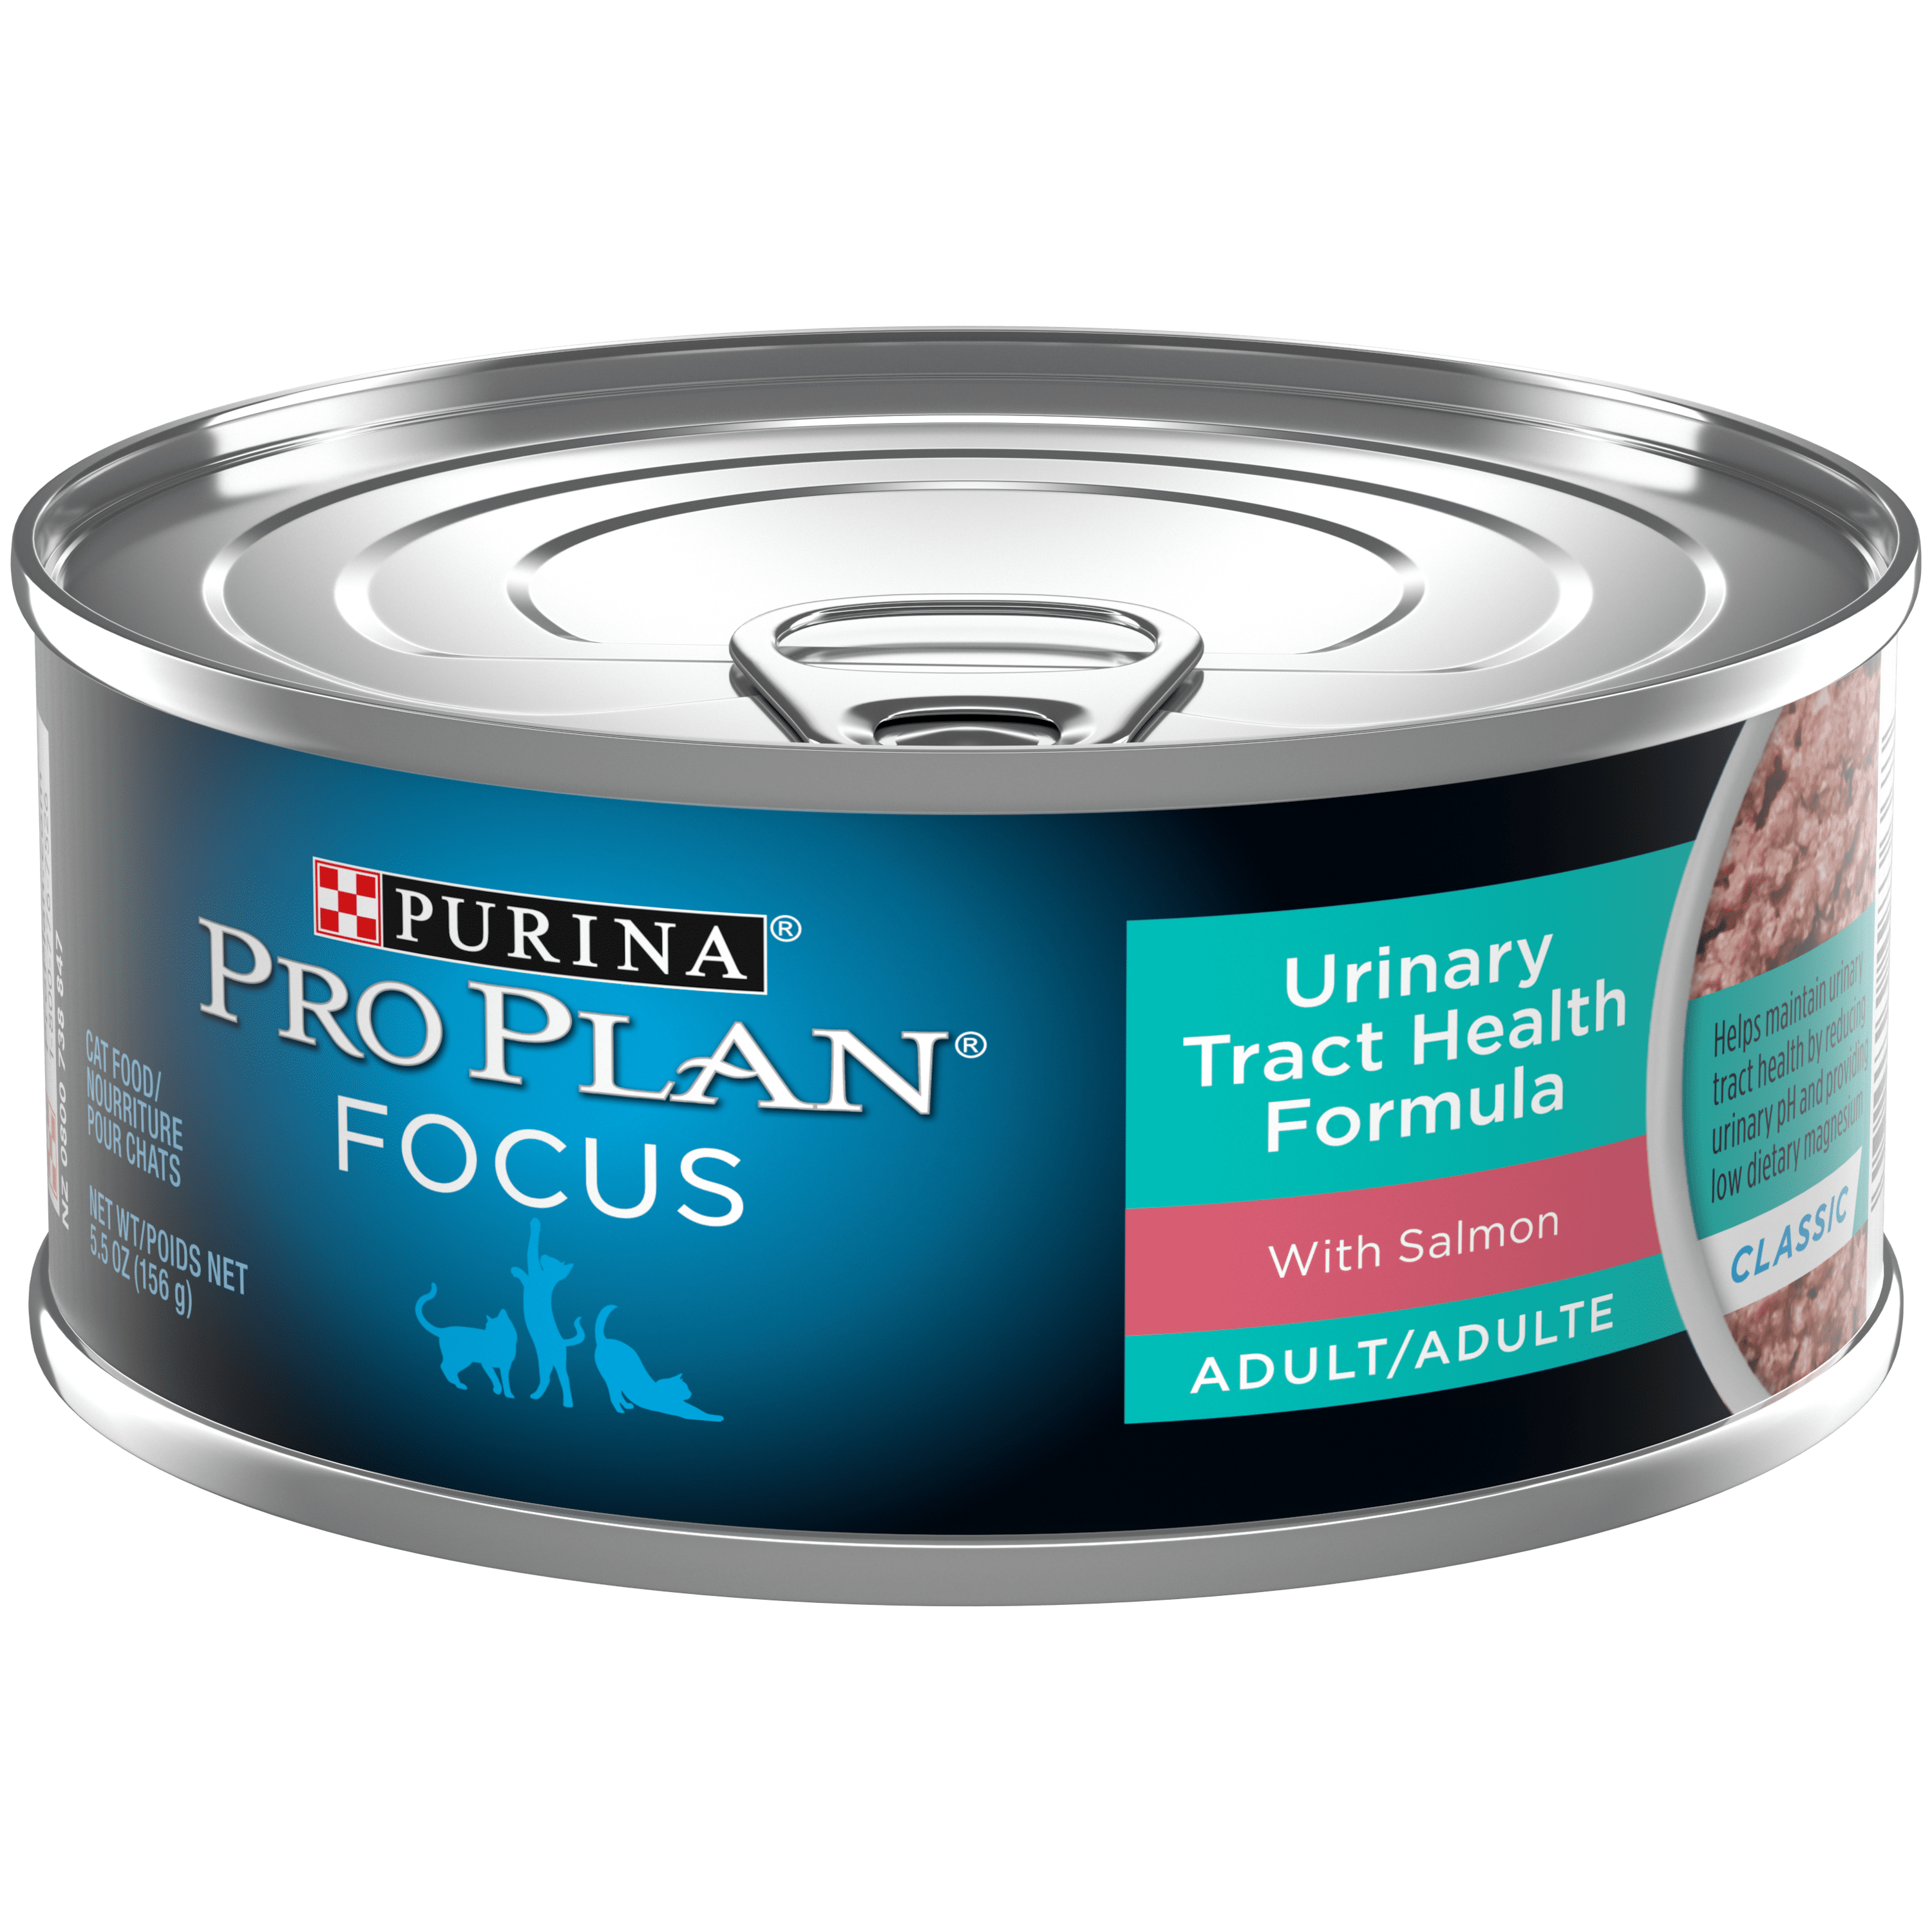 (24 Pack) Purina Pro Plan Focus Adult Urinary Tract Health Formula with